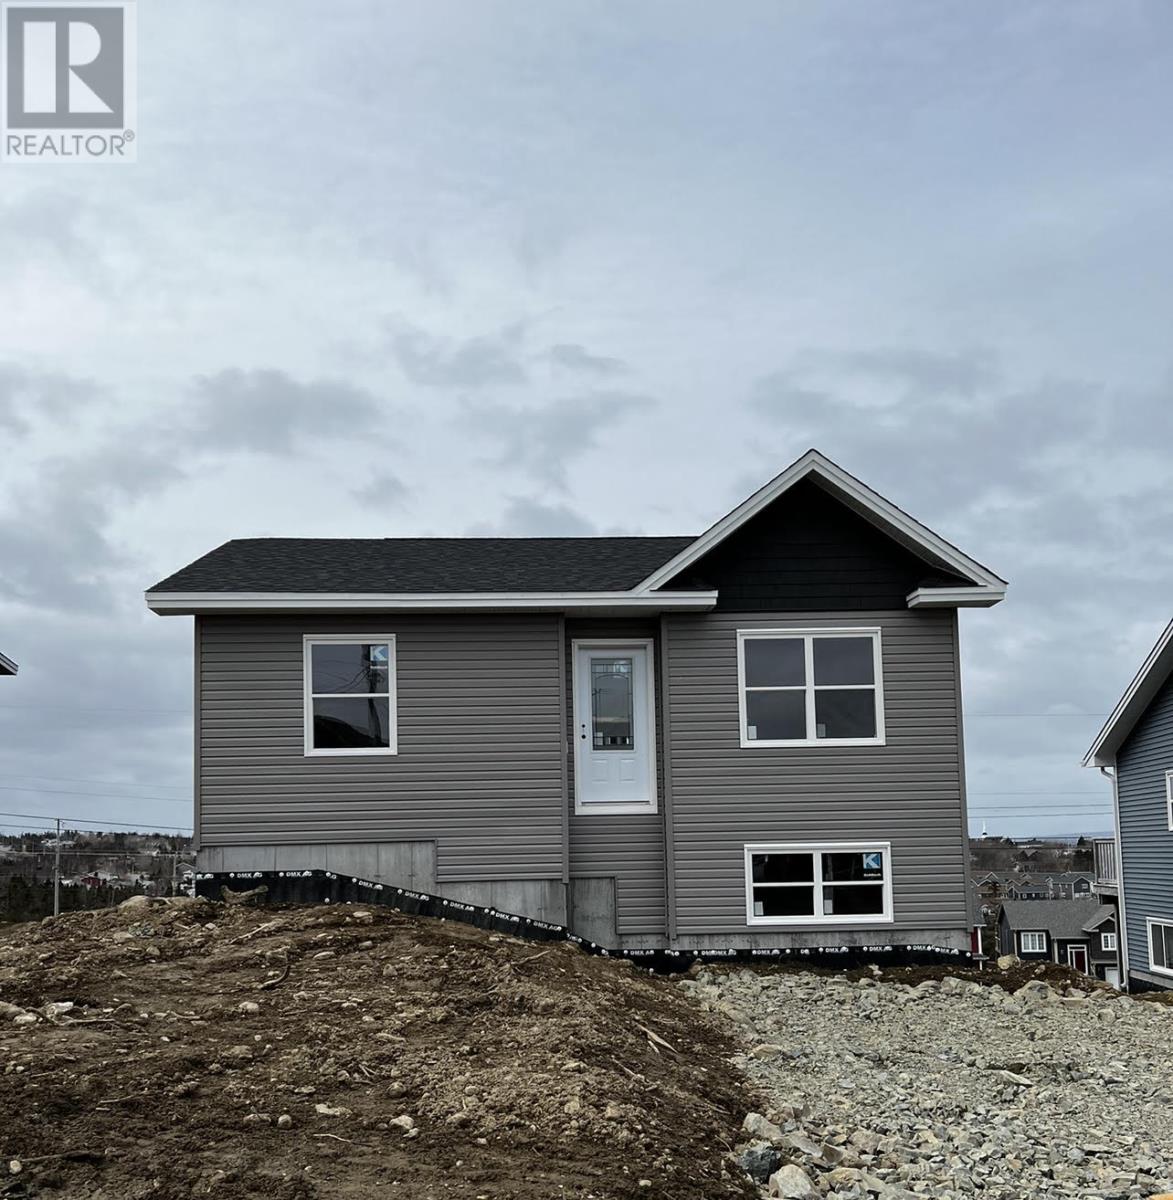 2 Bedroom Residential Home For Sale | 28 Samuel Drive | Conception Bay South | A1X0H9